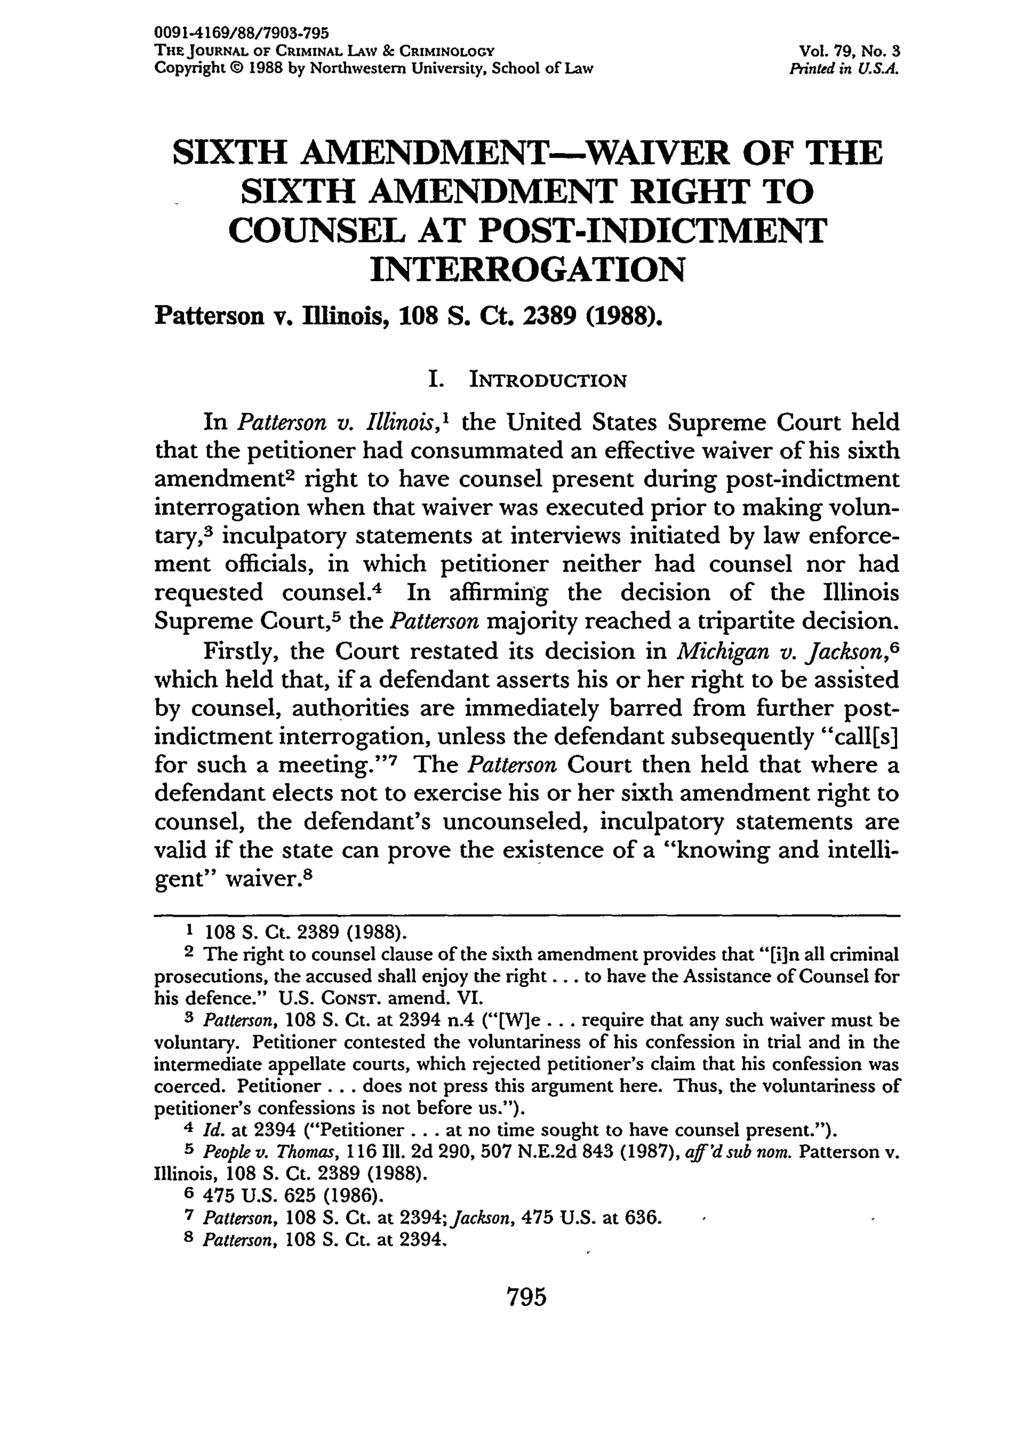 0091-4169/88/7903-795 THE JOURNAL OF CRIMINAL LAwv & CRIMINOLOGY Vol. 79, No. 3 Copyright 1988 by Northwestern University, School of Law Pzinted in U.S.A. SIXTH AMENDMENT-WAIVER OF THE SIXTH AMENDMENT RIGHT TO COUNSEL AT POST-INDICTMENT INTERROGATION Patterson v.